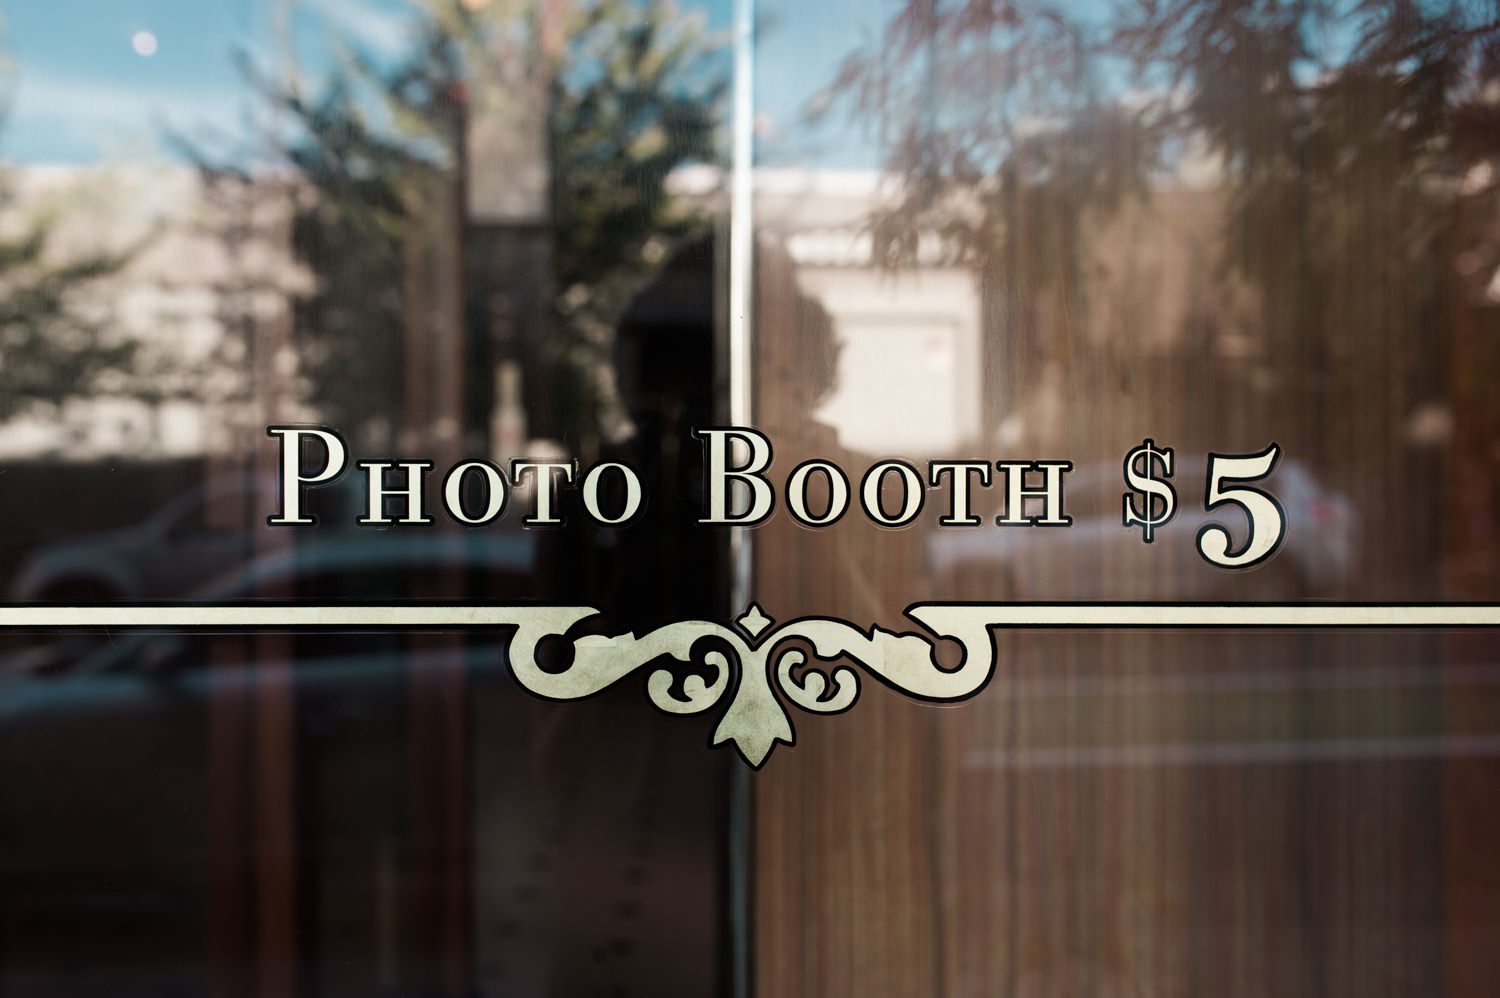 Ace Hotel photo booth sign. by Ace Hotel wedding photographer Briana Morrison